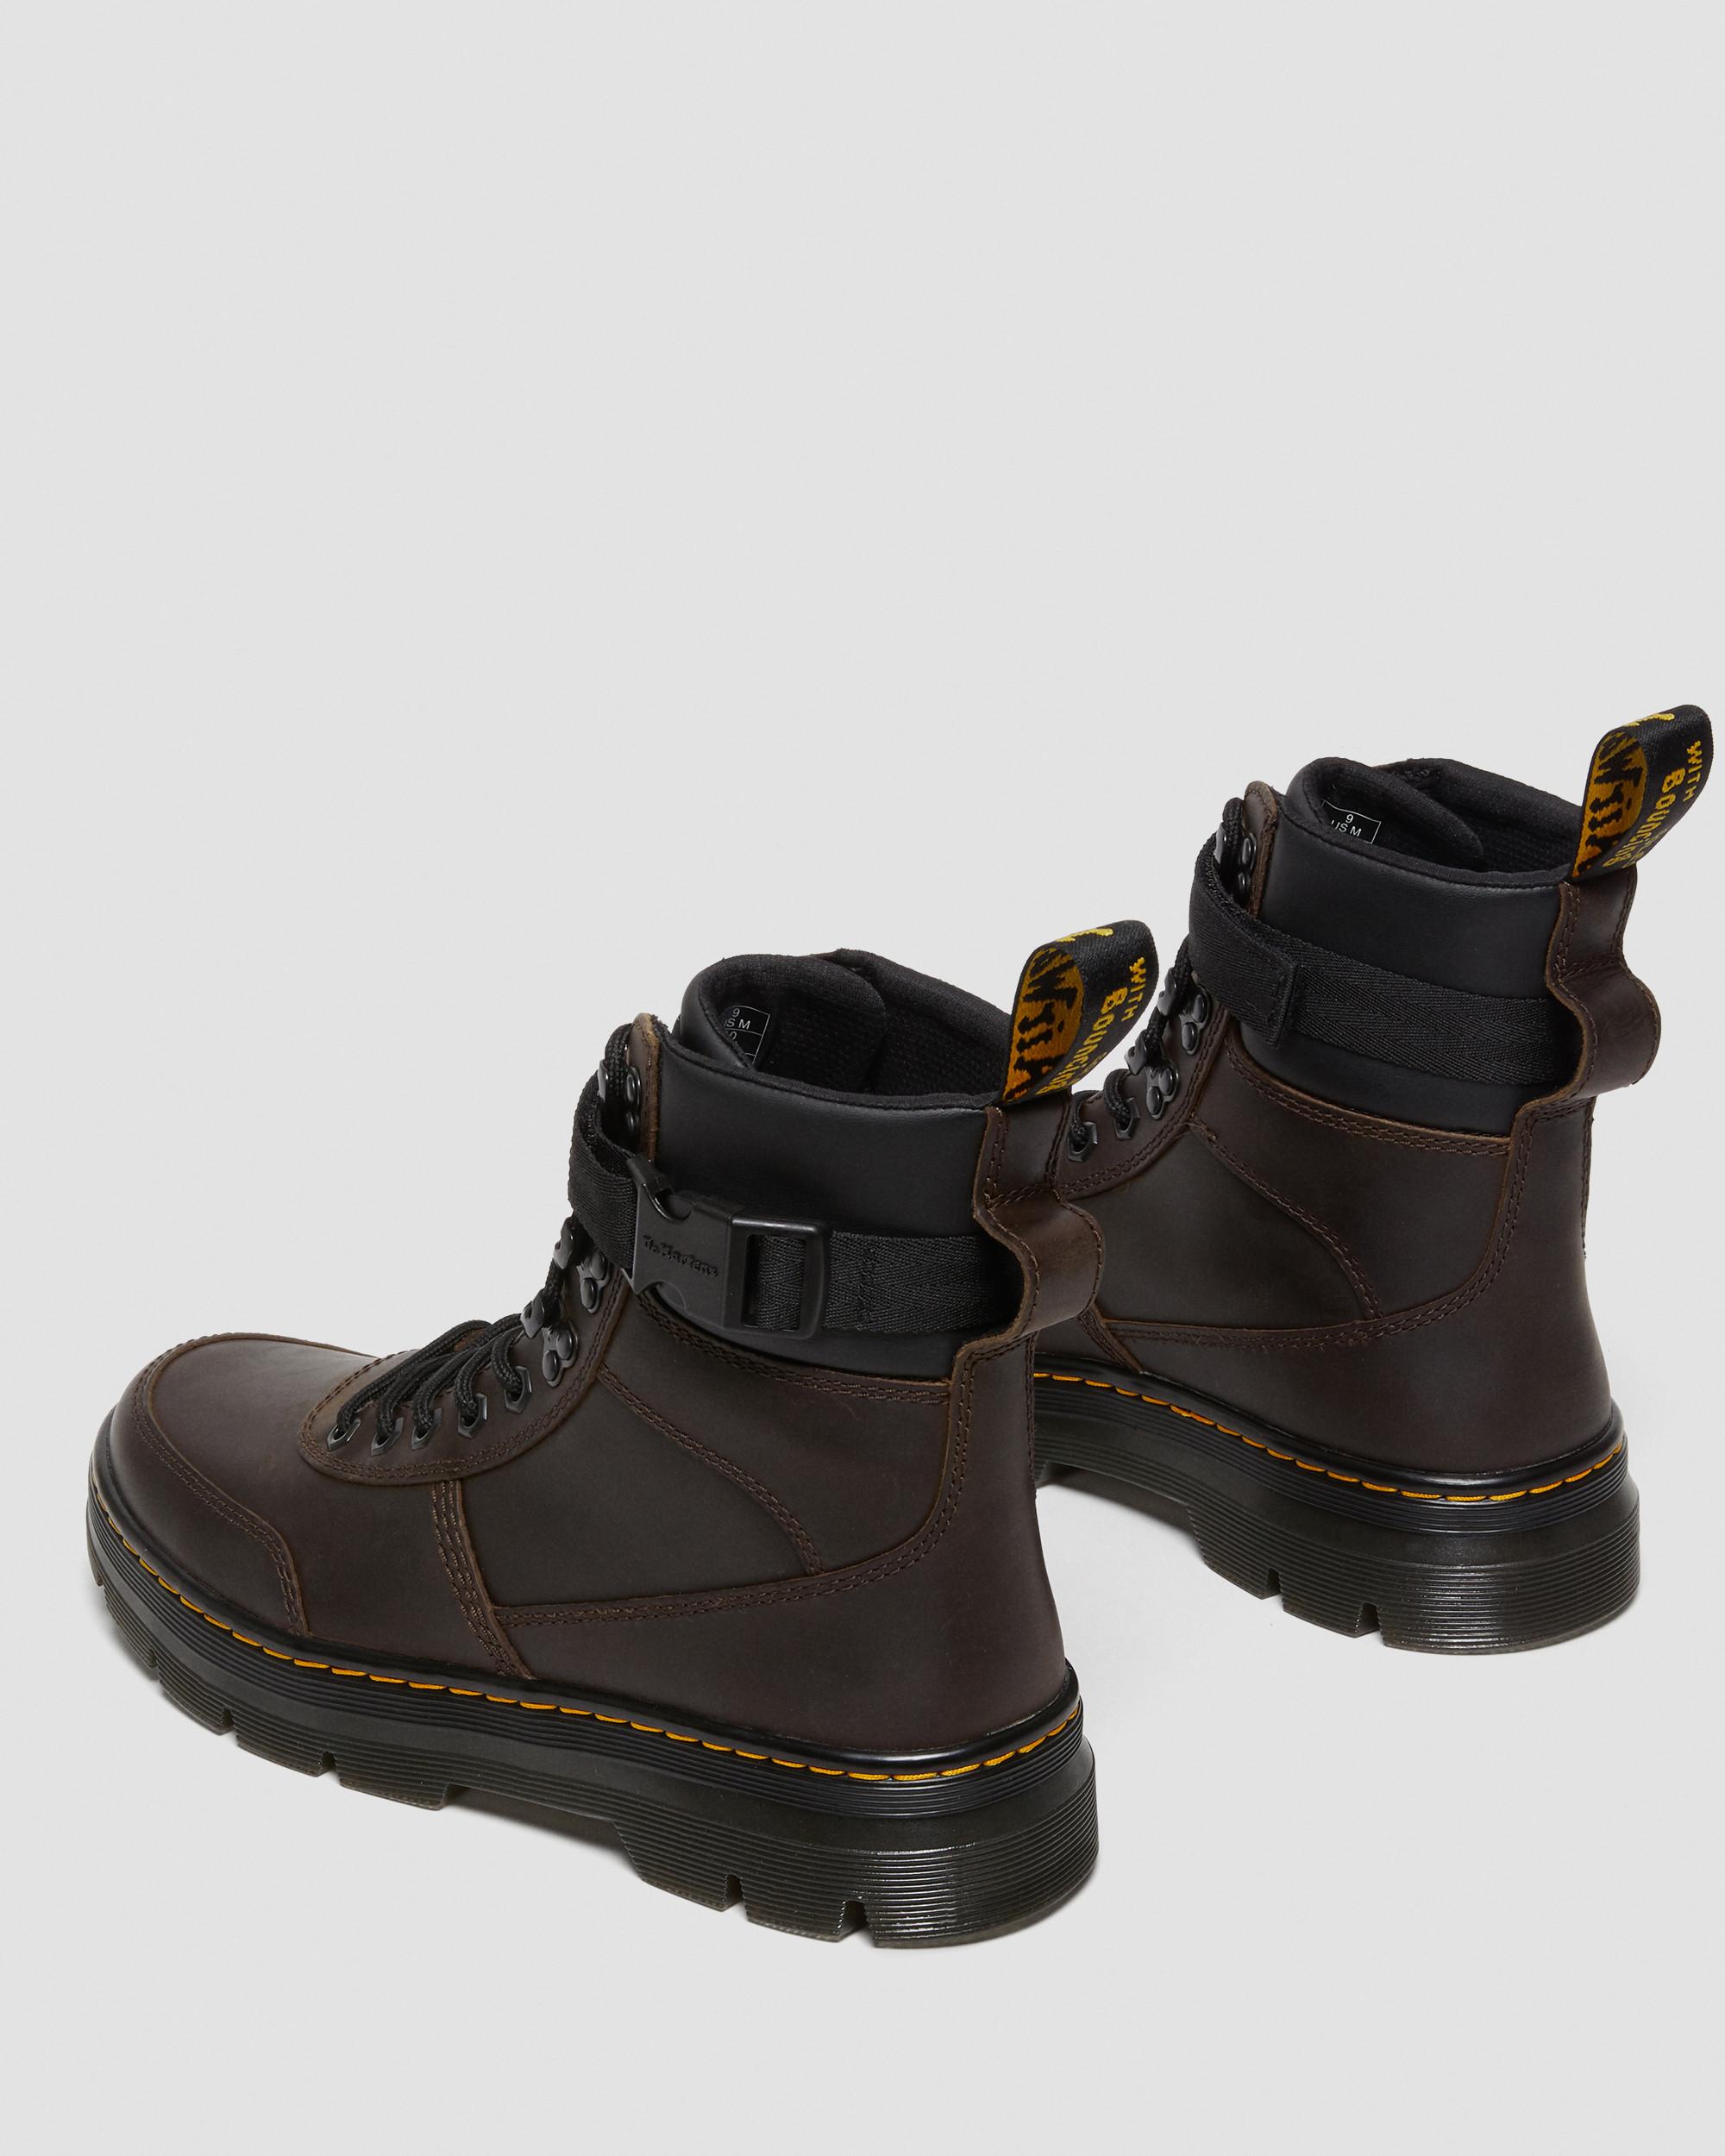 Combs Tech Crazy Horse Leather Casual Boots, Dark Brown | Dr. Martens